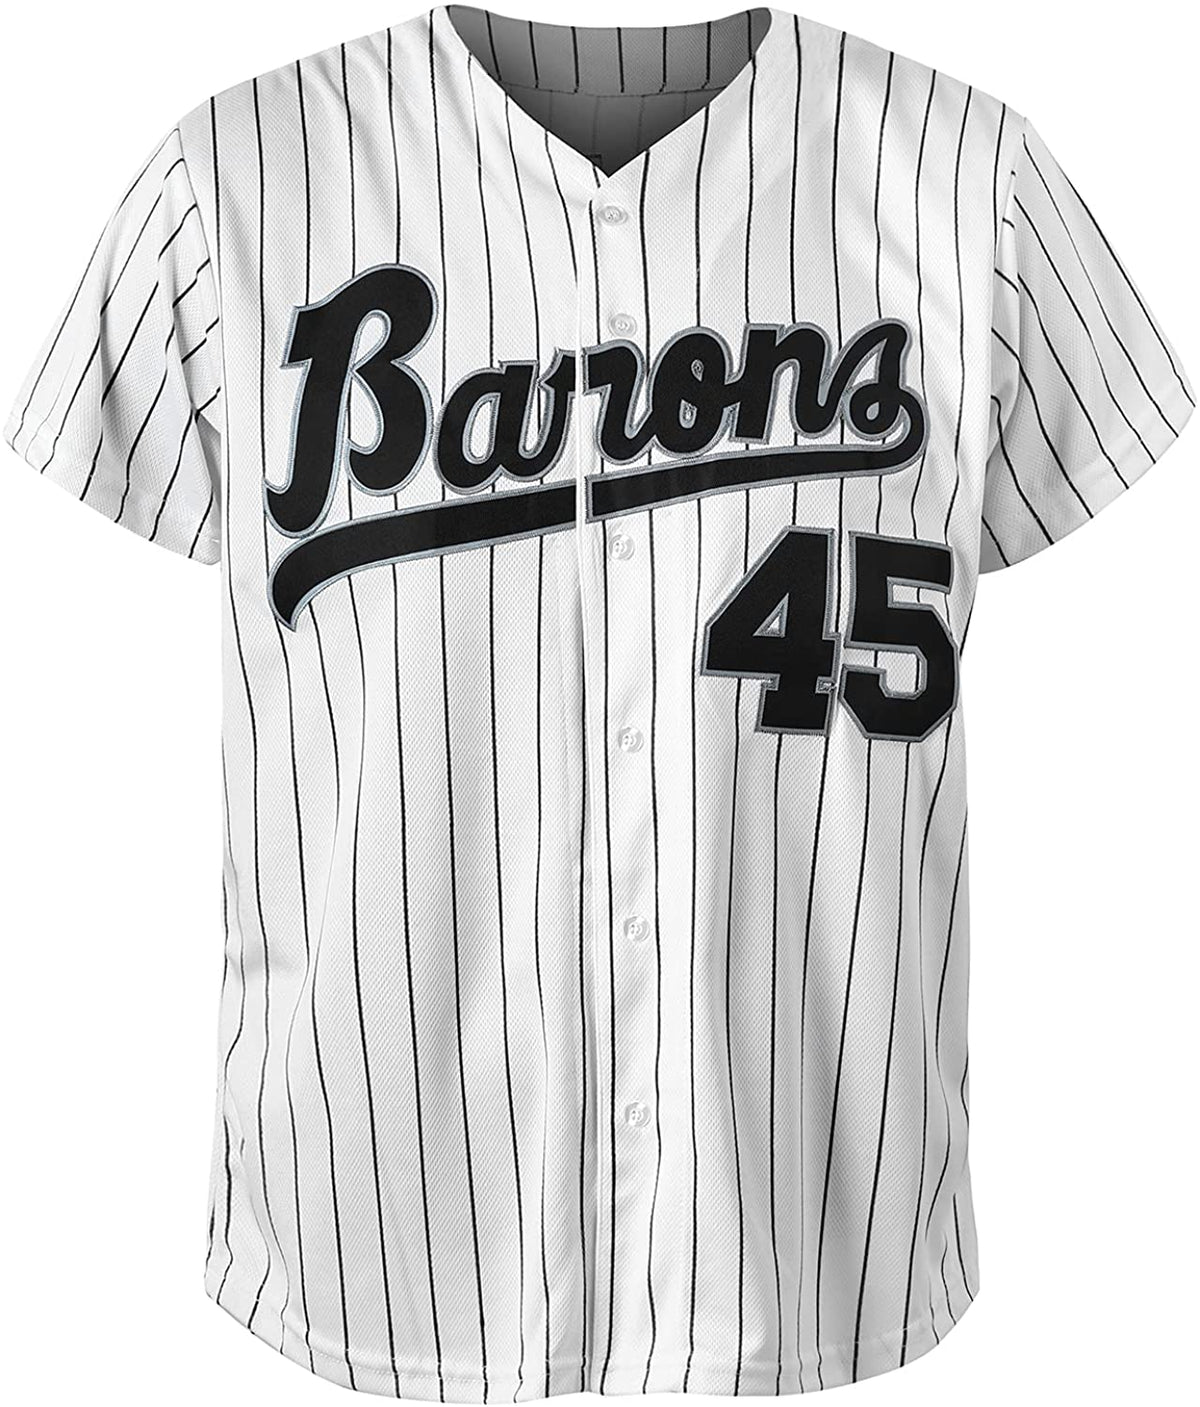 Michael Jordan Chicago White Sox Field of Dreams Jersey - clothing